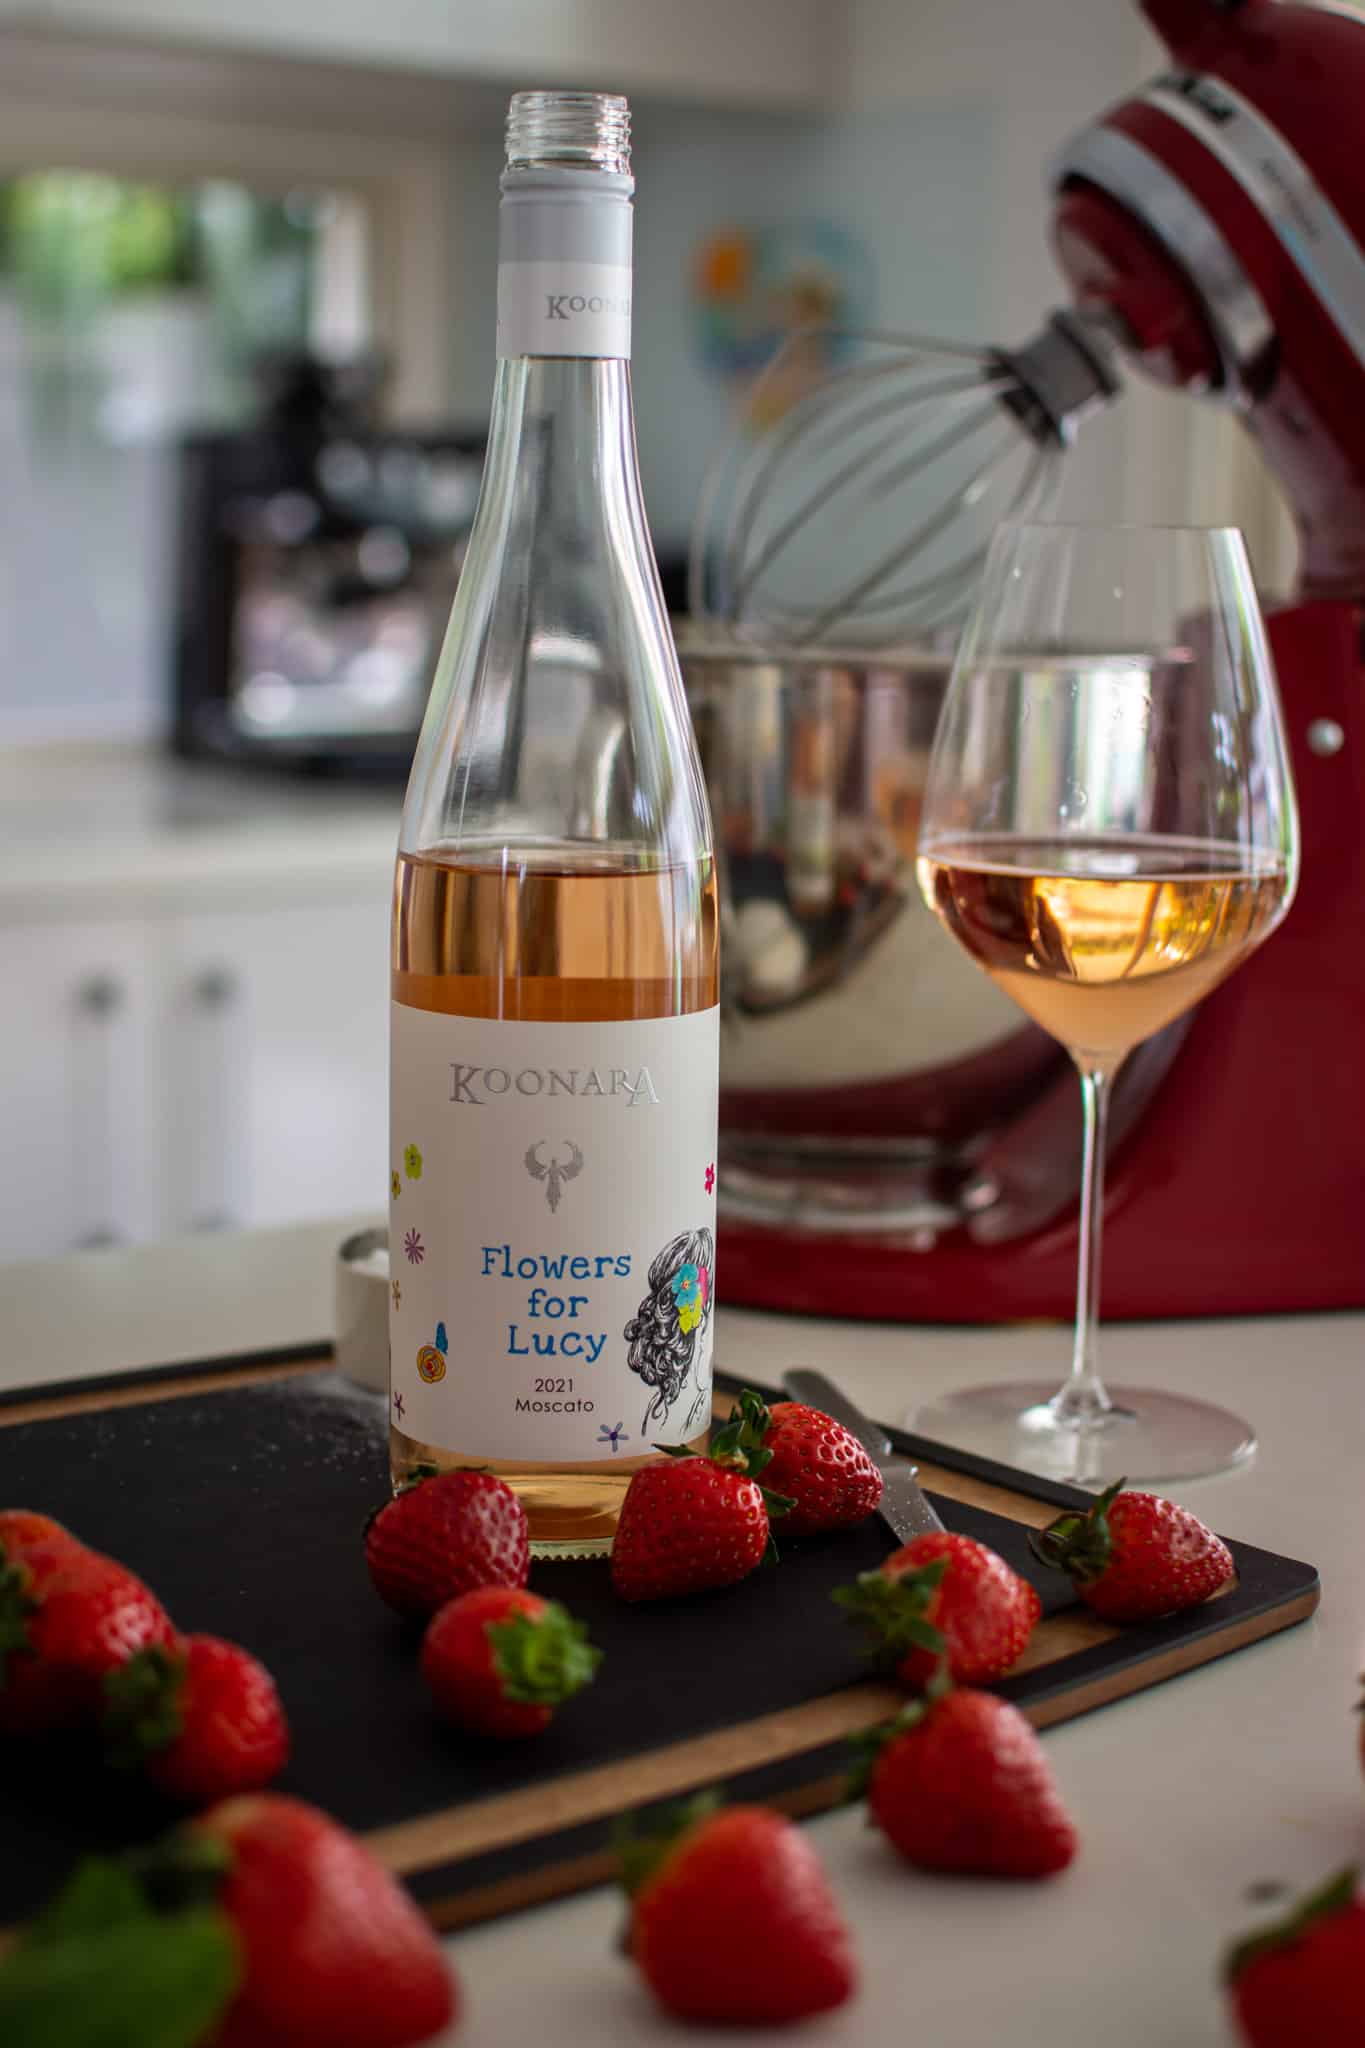 Koonara Moscato on chopping board in kitchen with loads of strawberries, wine glass and a kitchen aid mixer in the background